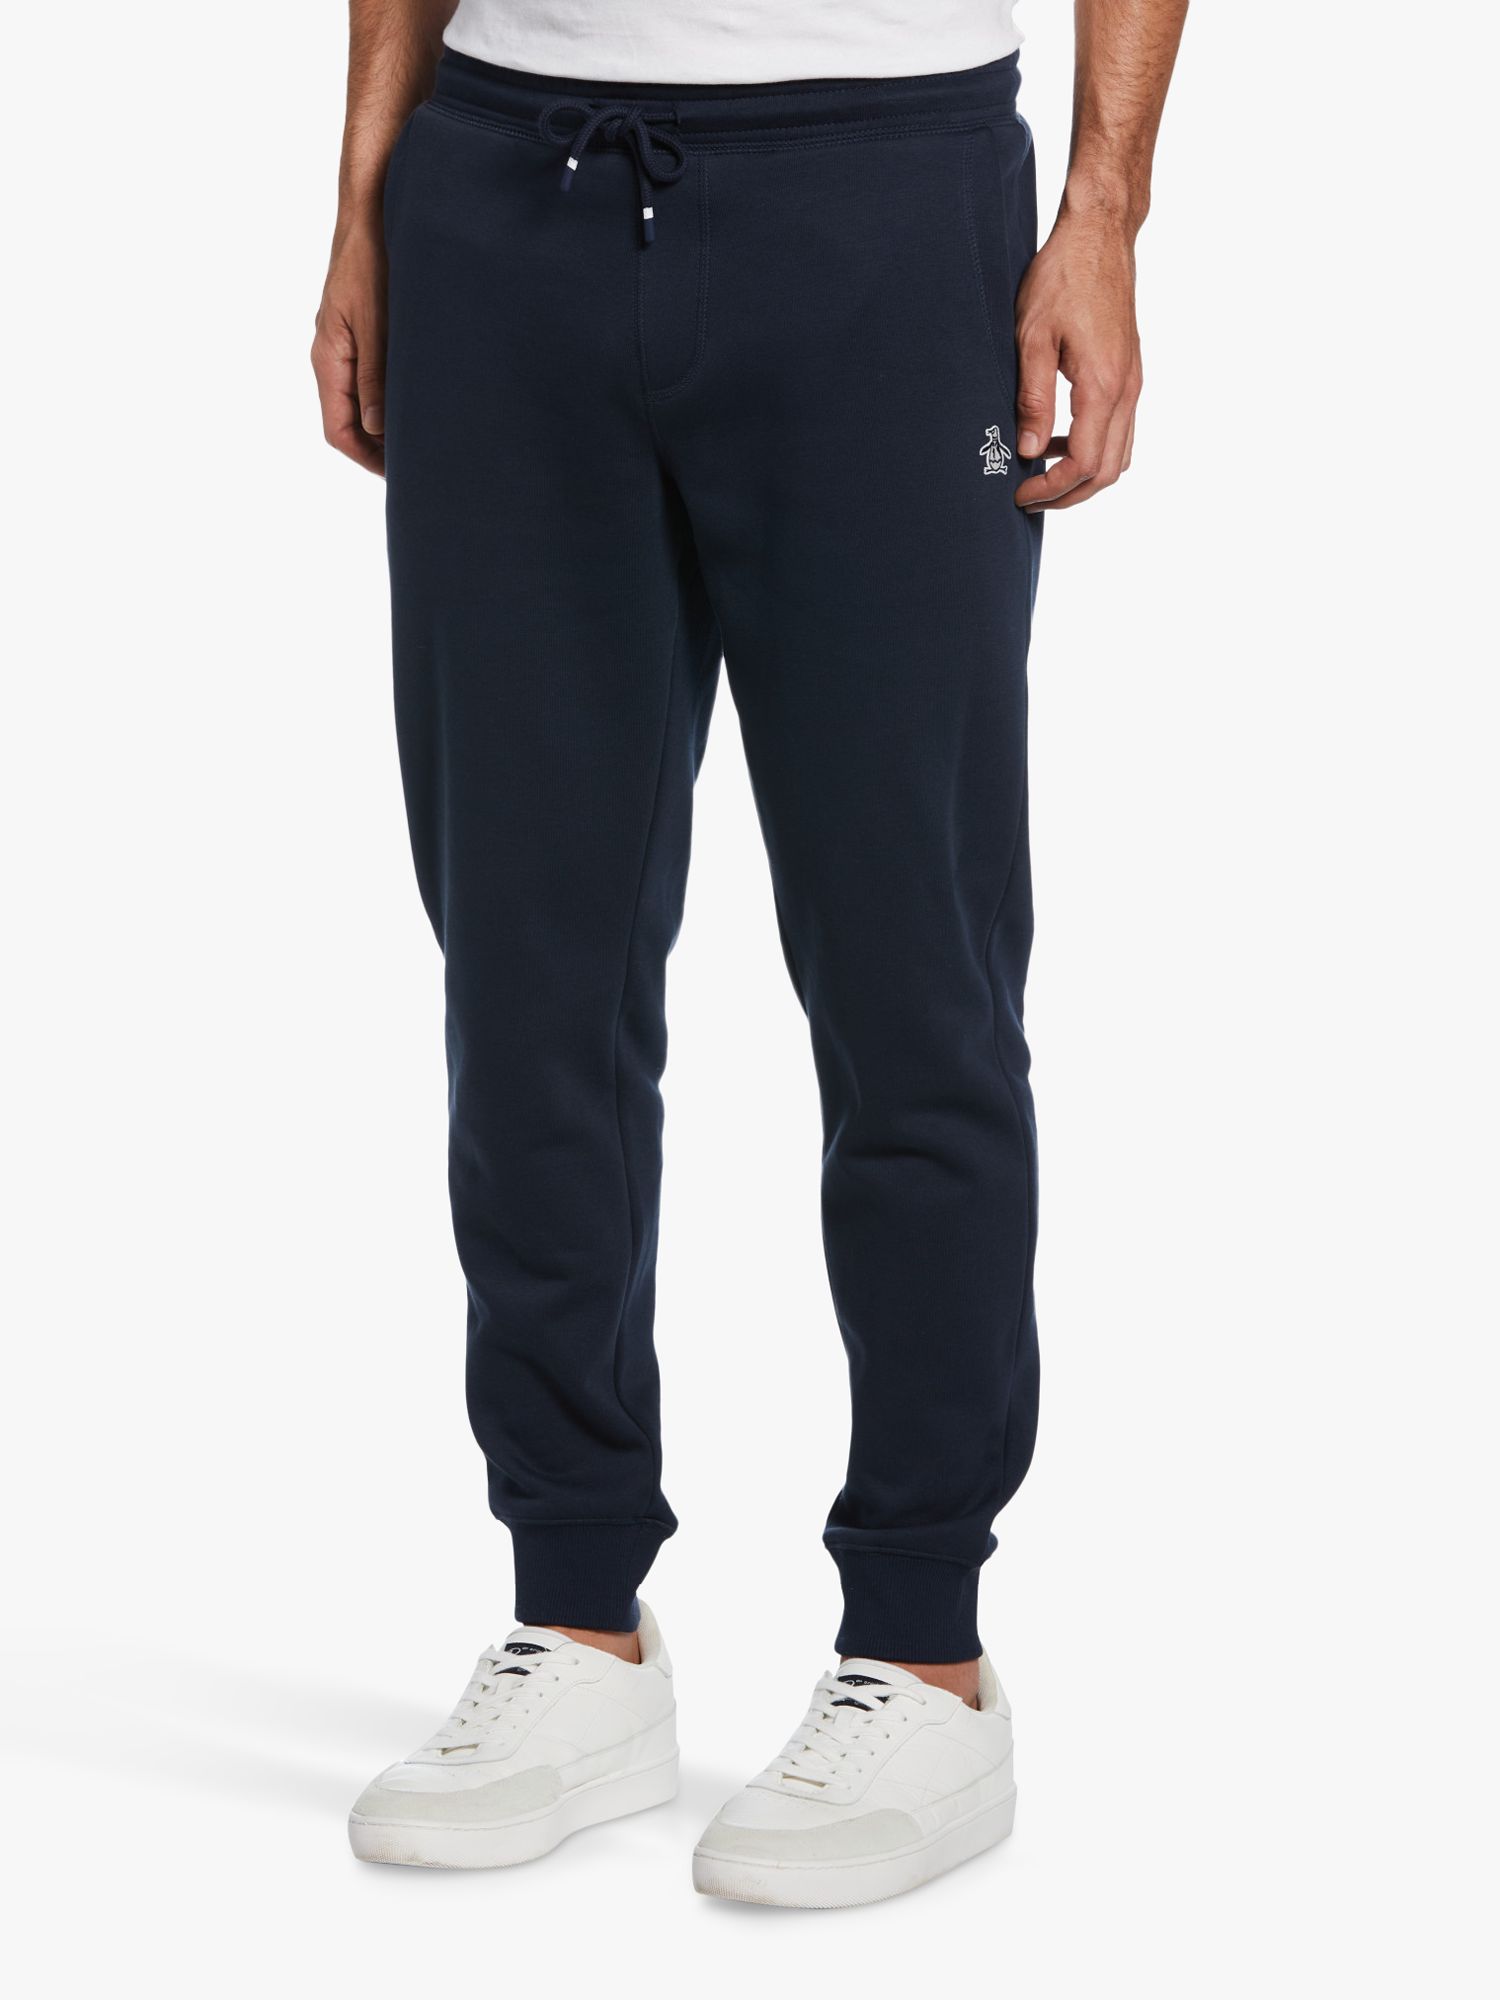 Womens Authentic Organic Tracksuit Bottoms